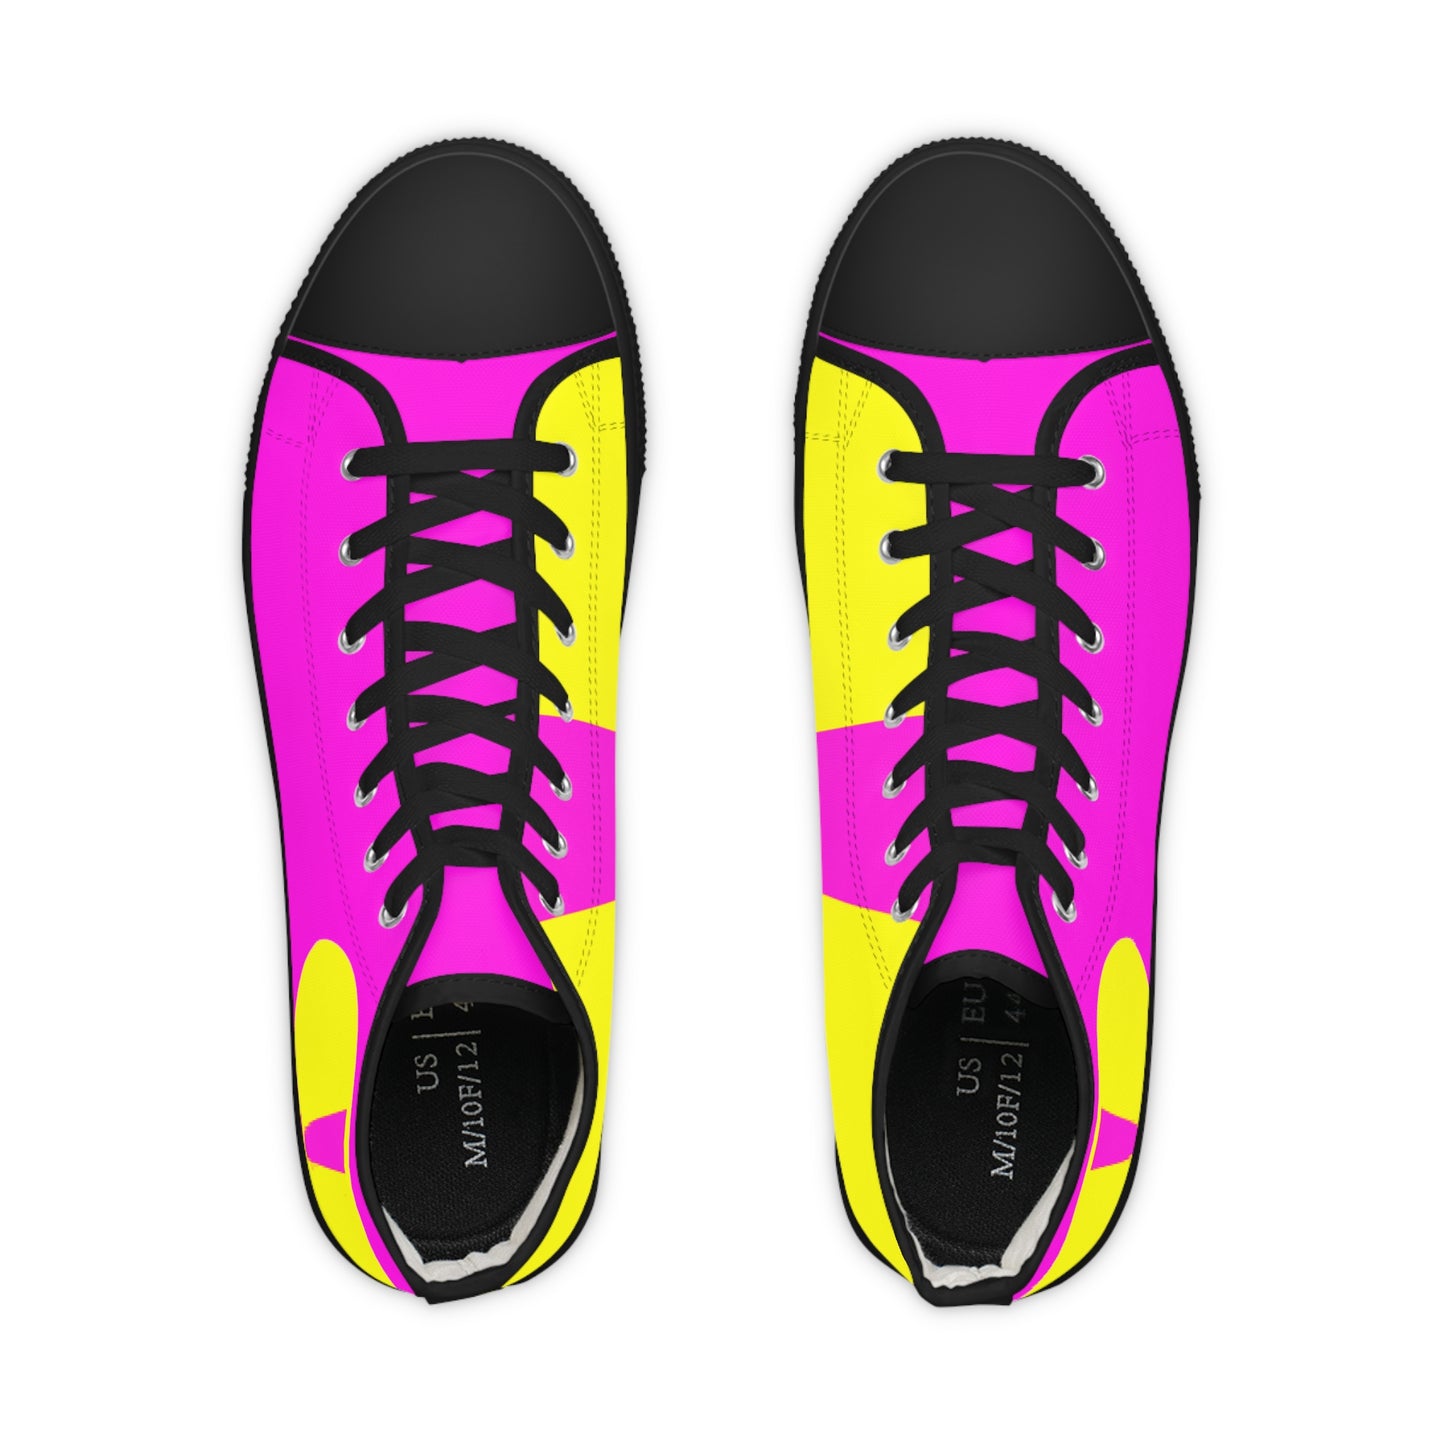 Limited Edition High Top Sneakers - !